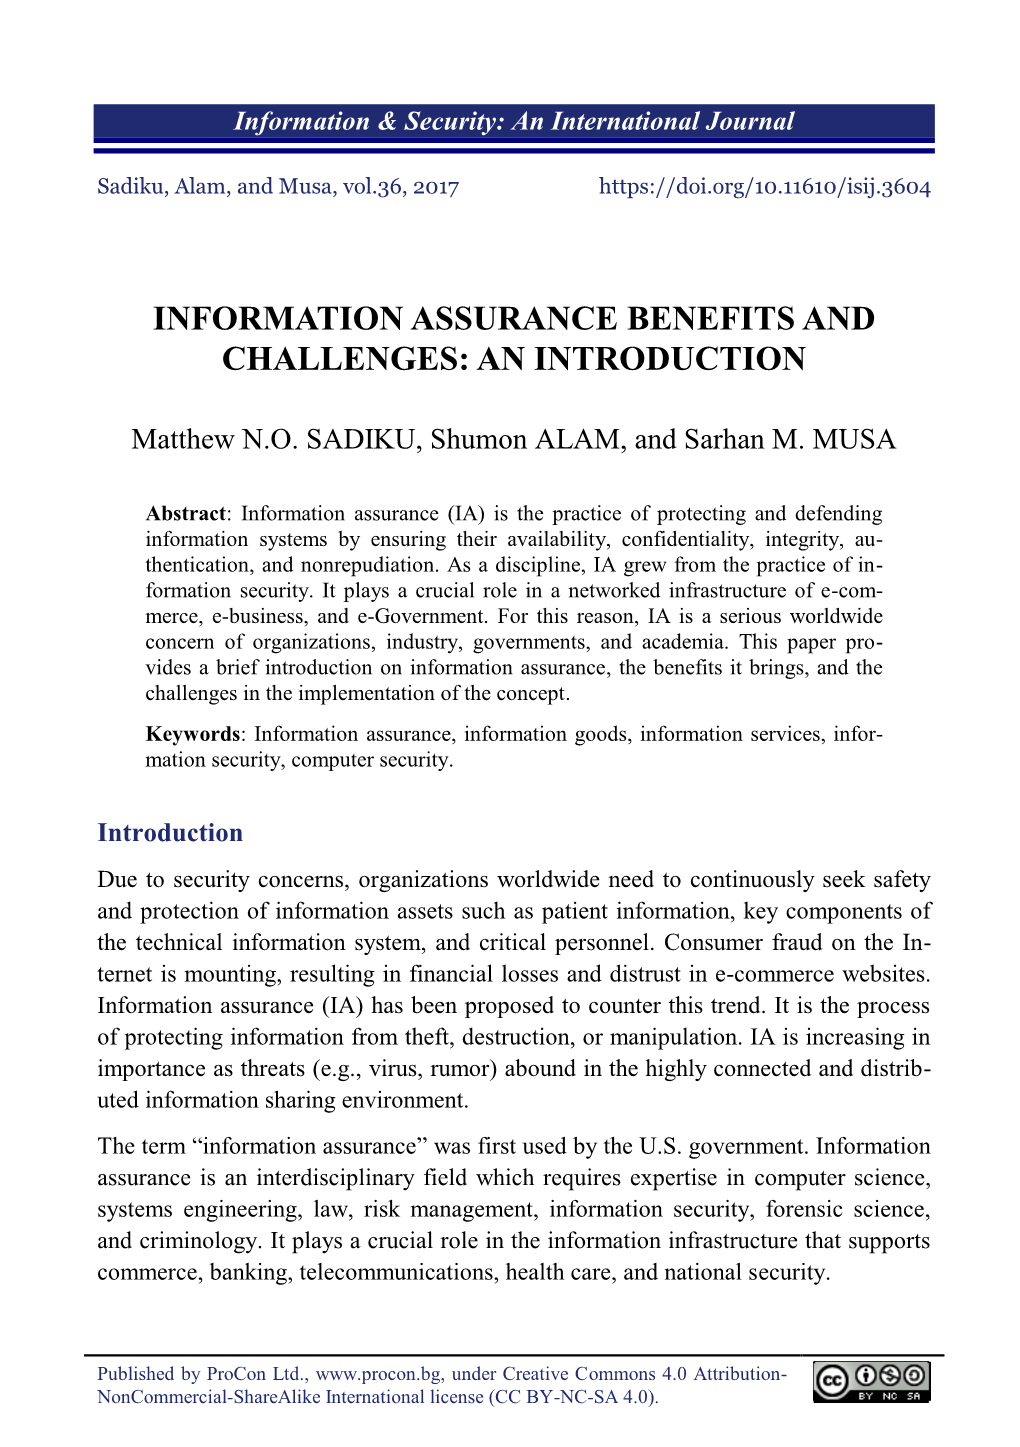 Information Assurance Benefits and Challenges: an Introduction